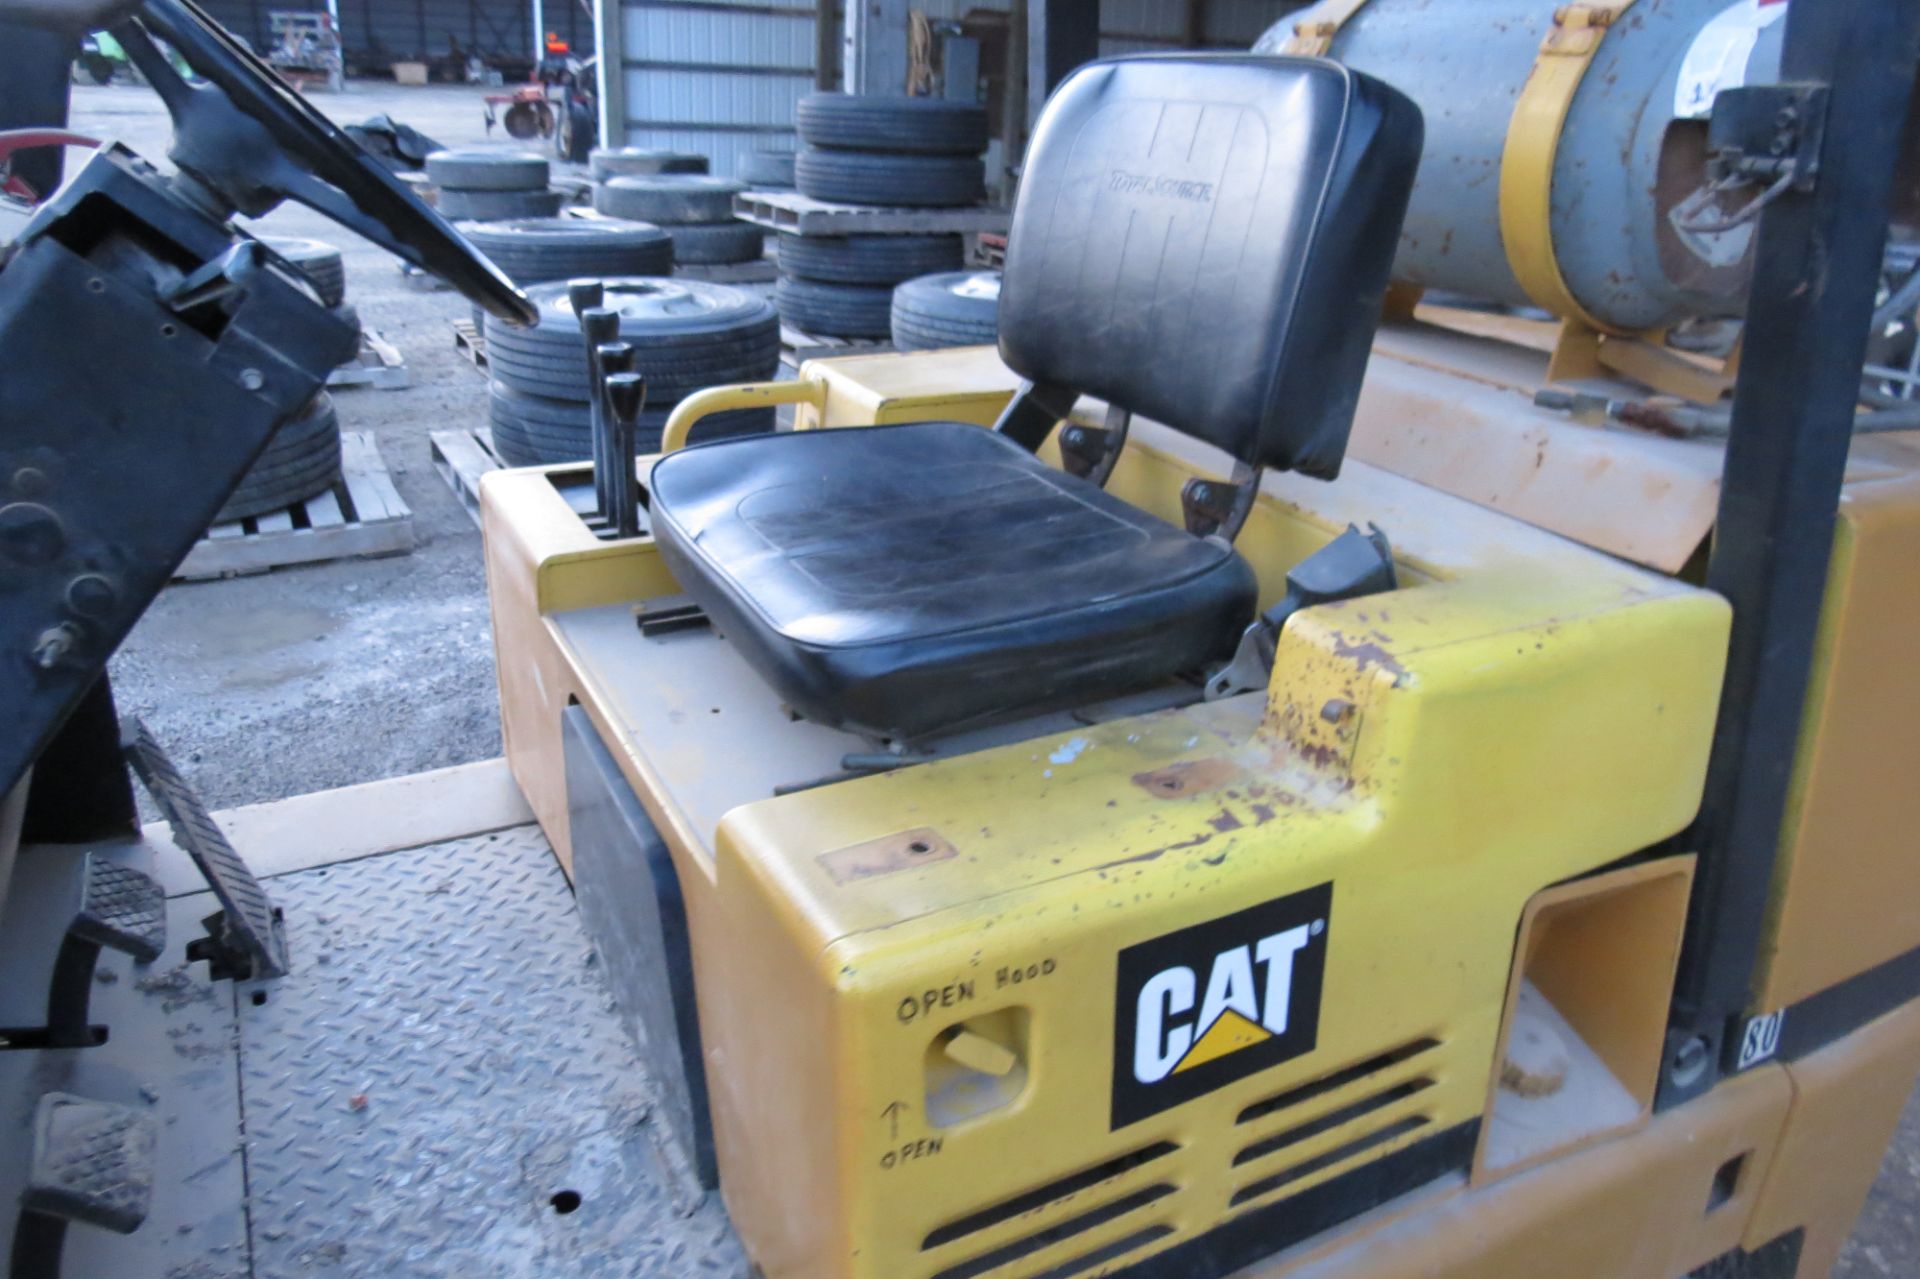 Cat GC25 forklift, 5000 lb cap, 3 stage mast, solid tires, LP, sideshift, sells with LP tank - Image 9 of 10